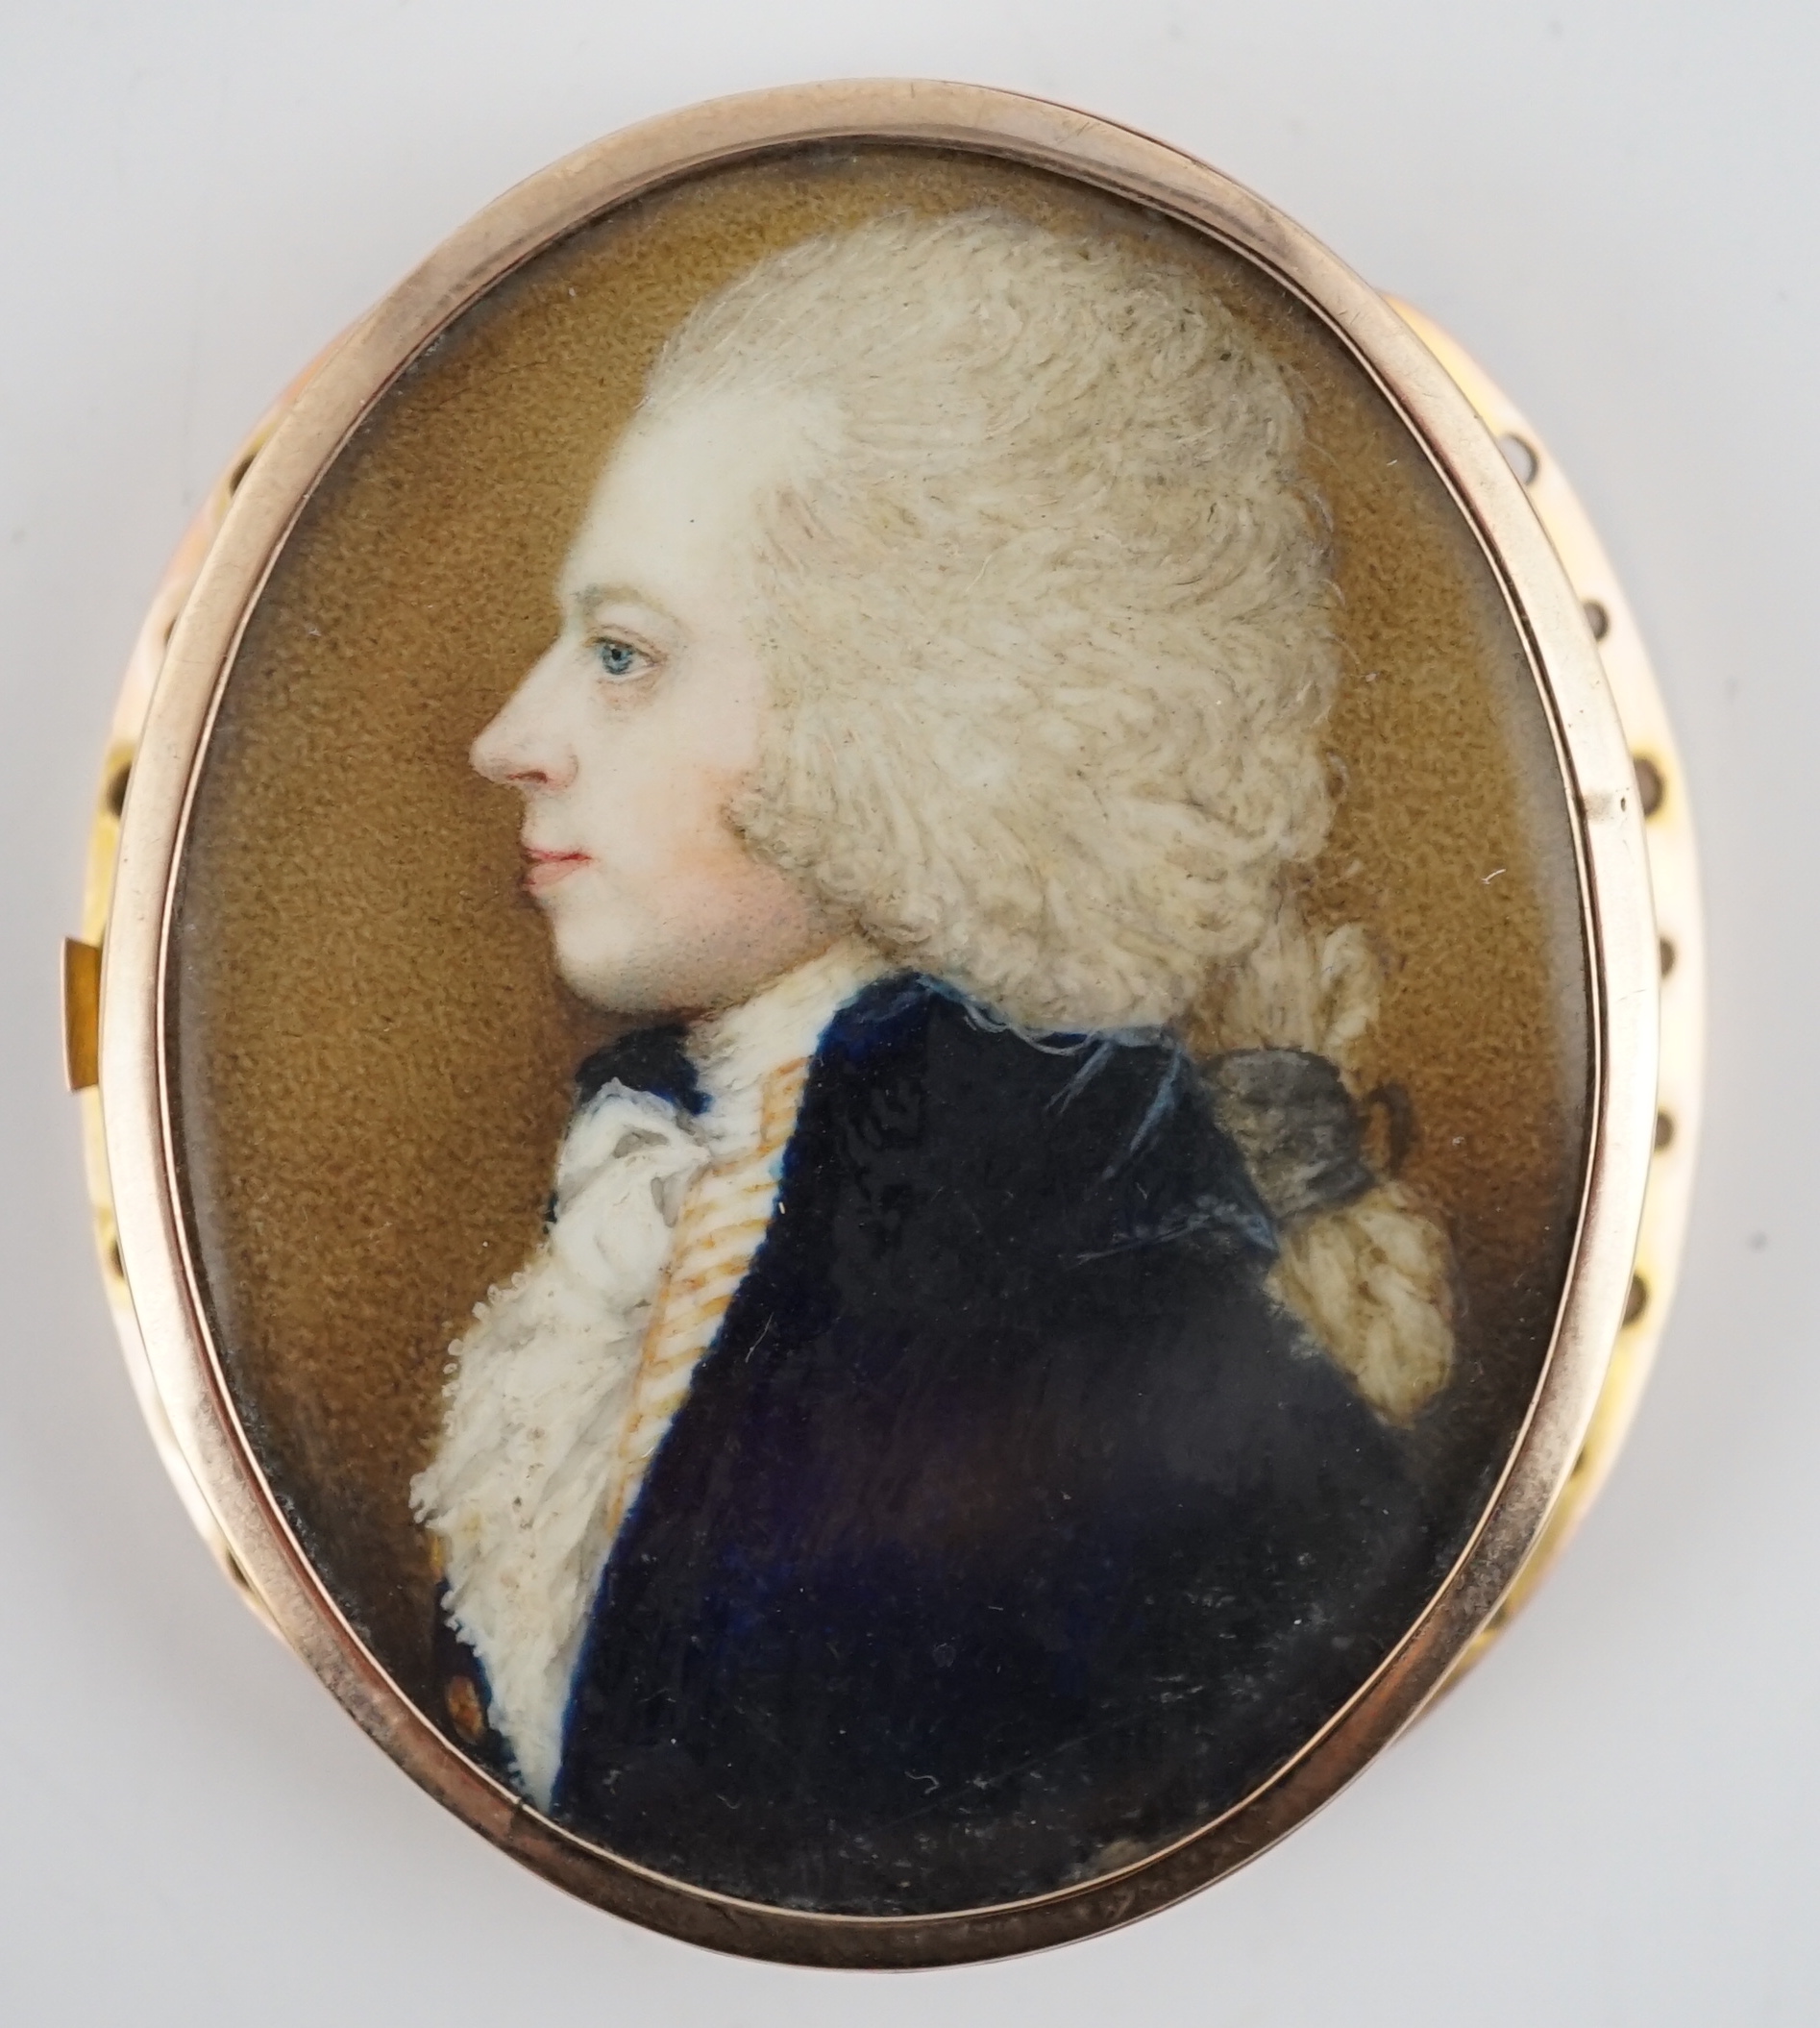 Jeremiah Meyer, R.A. (Anglo-German, 1735-1789), Portrait miniature of a gentleman, oil on ivory, 3.8 x 3cm. CITES Submission reference AQZAA8YP